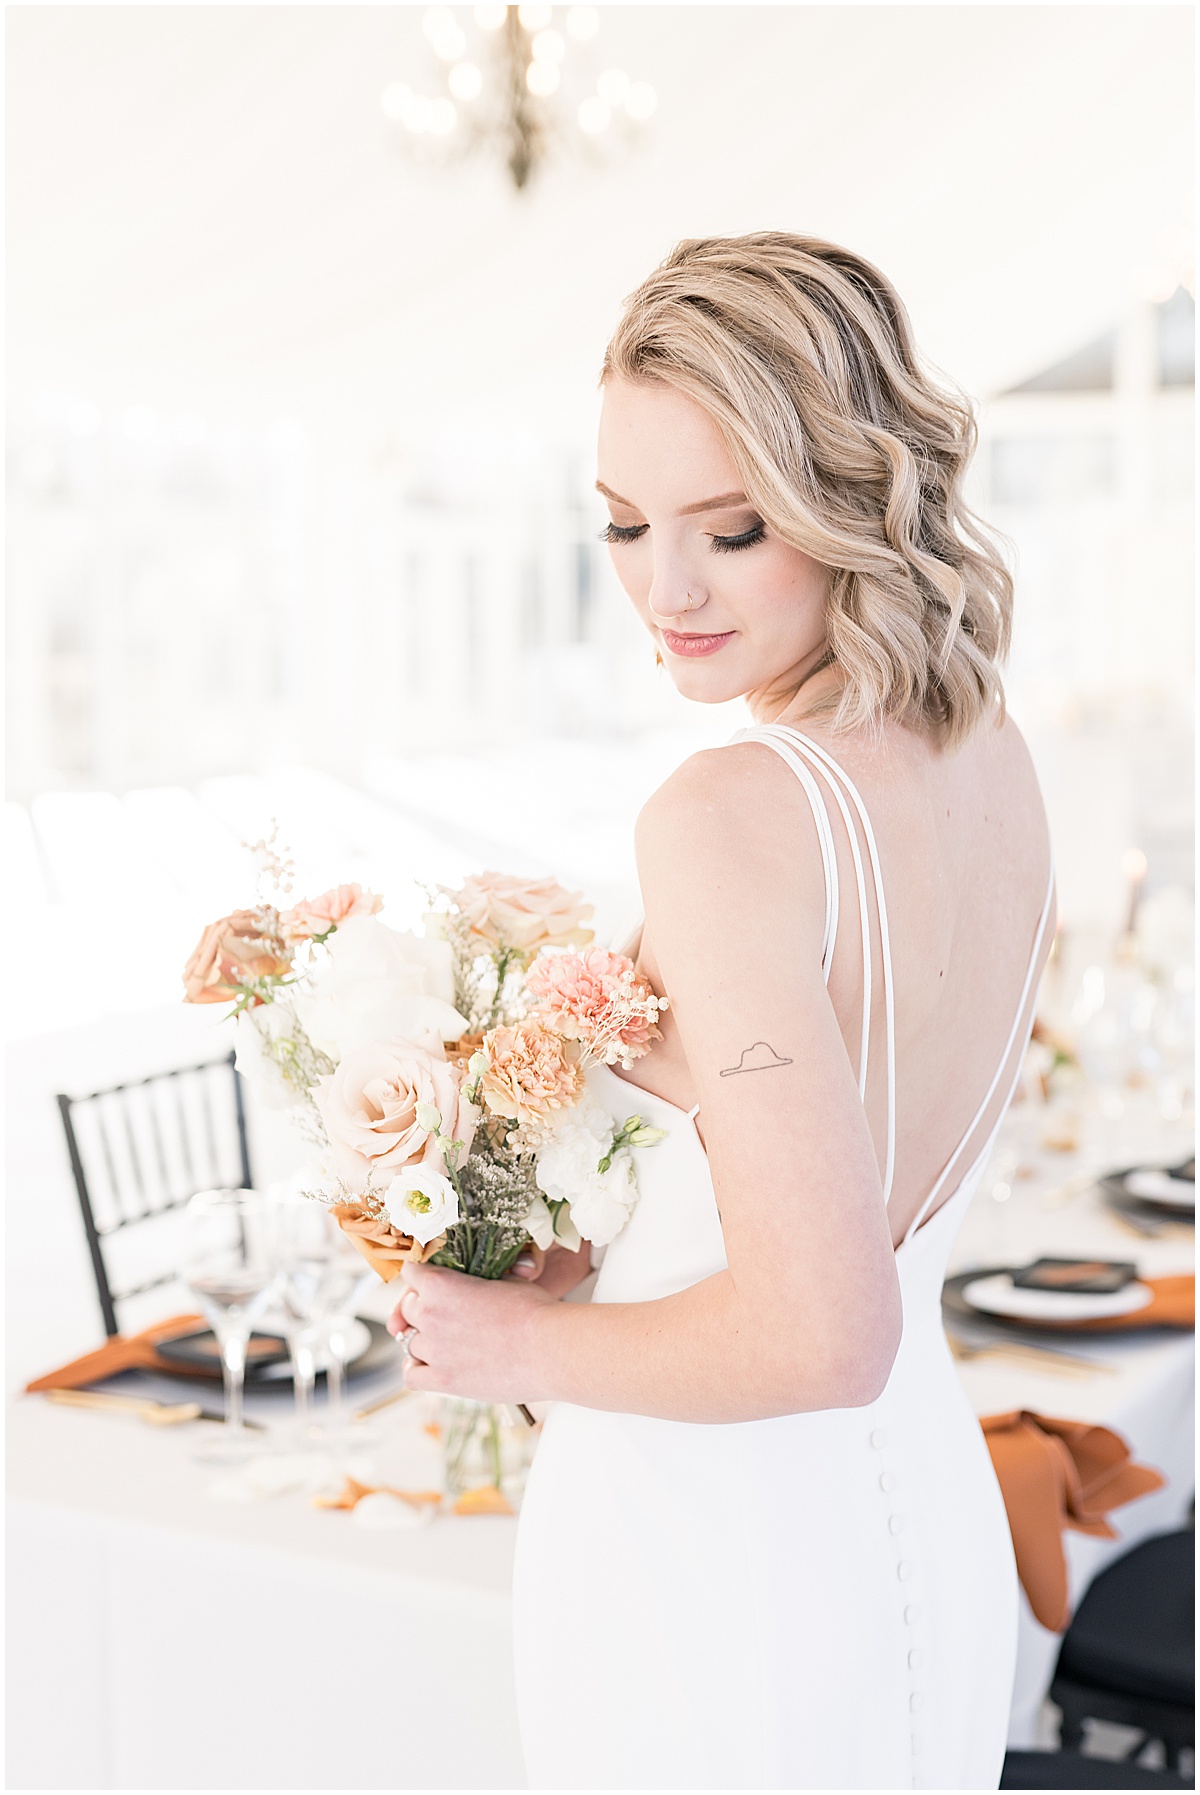 Bride holding bouquet at fall wedding at The Ritz Charles Garden Pavilion in Carmel, Indiana photographed by Victoria Rayburn Photography